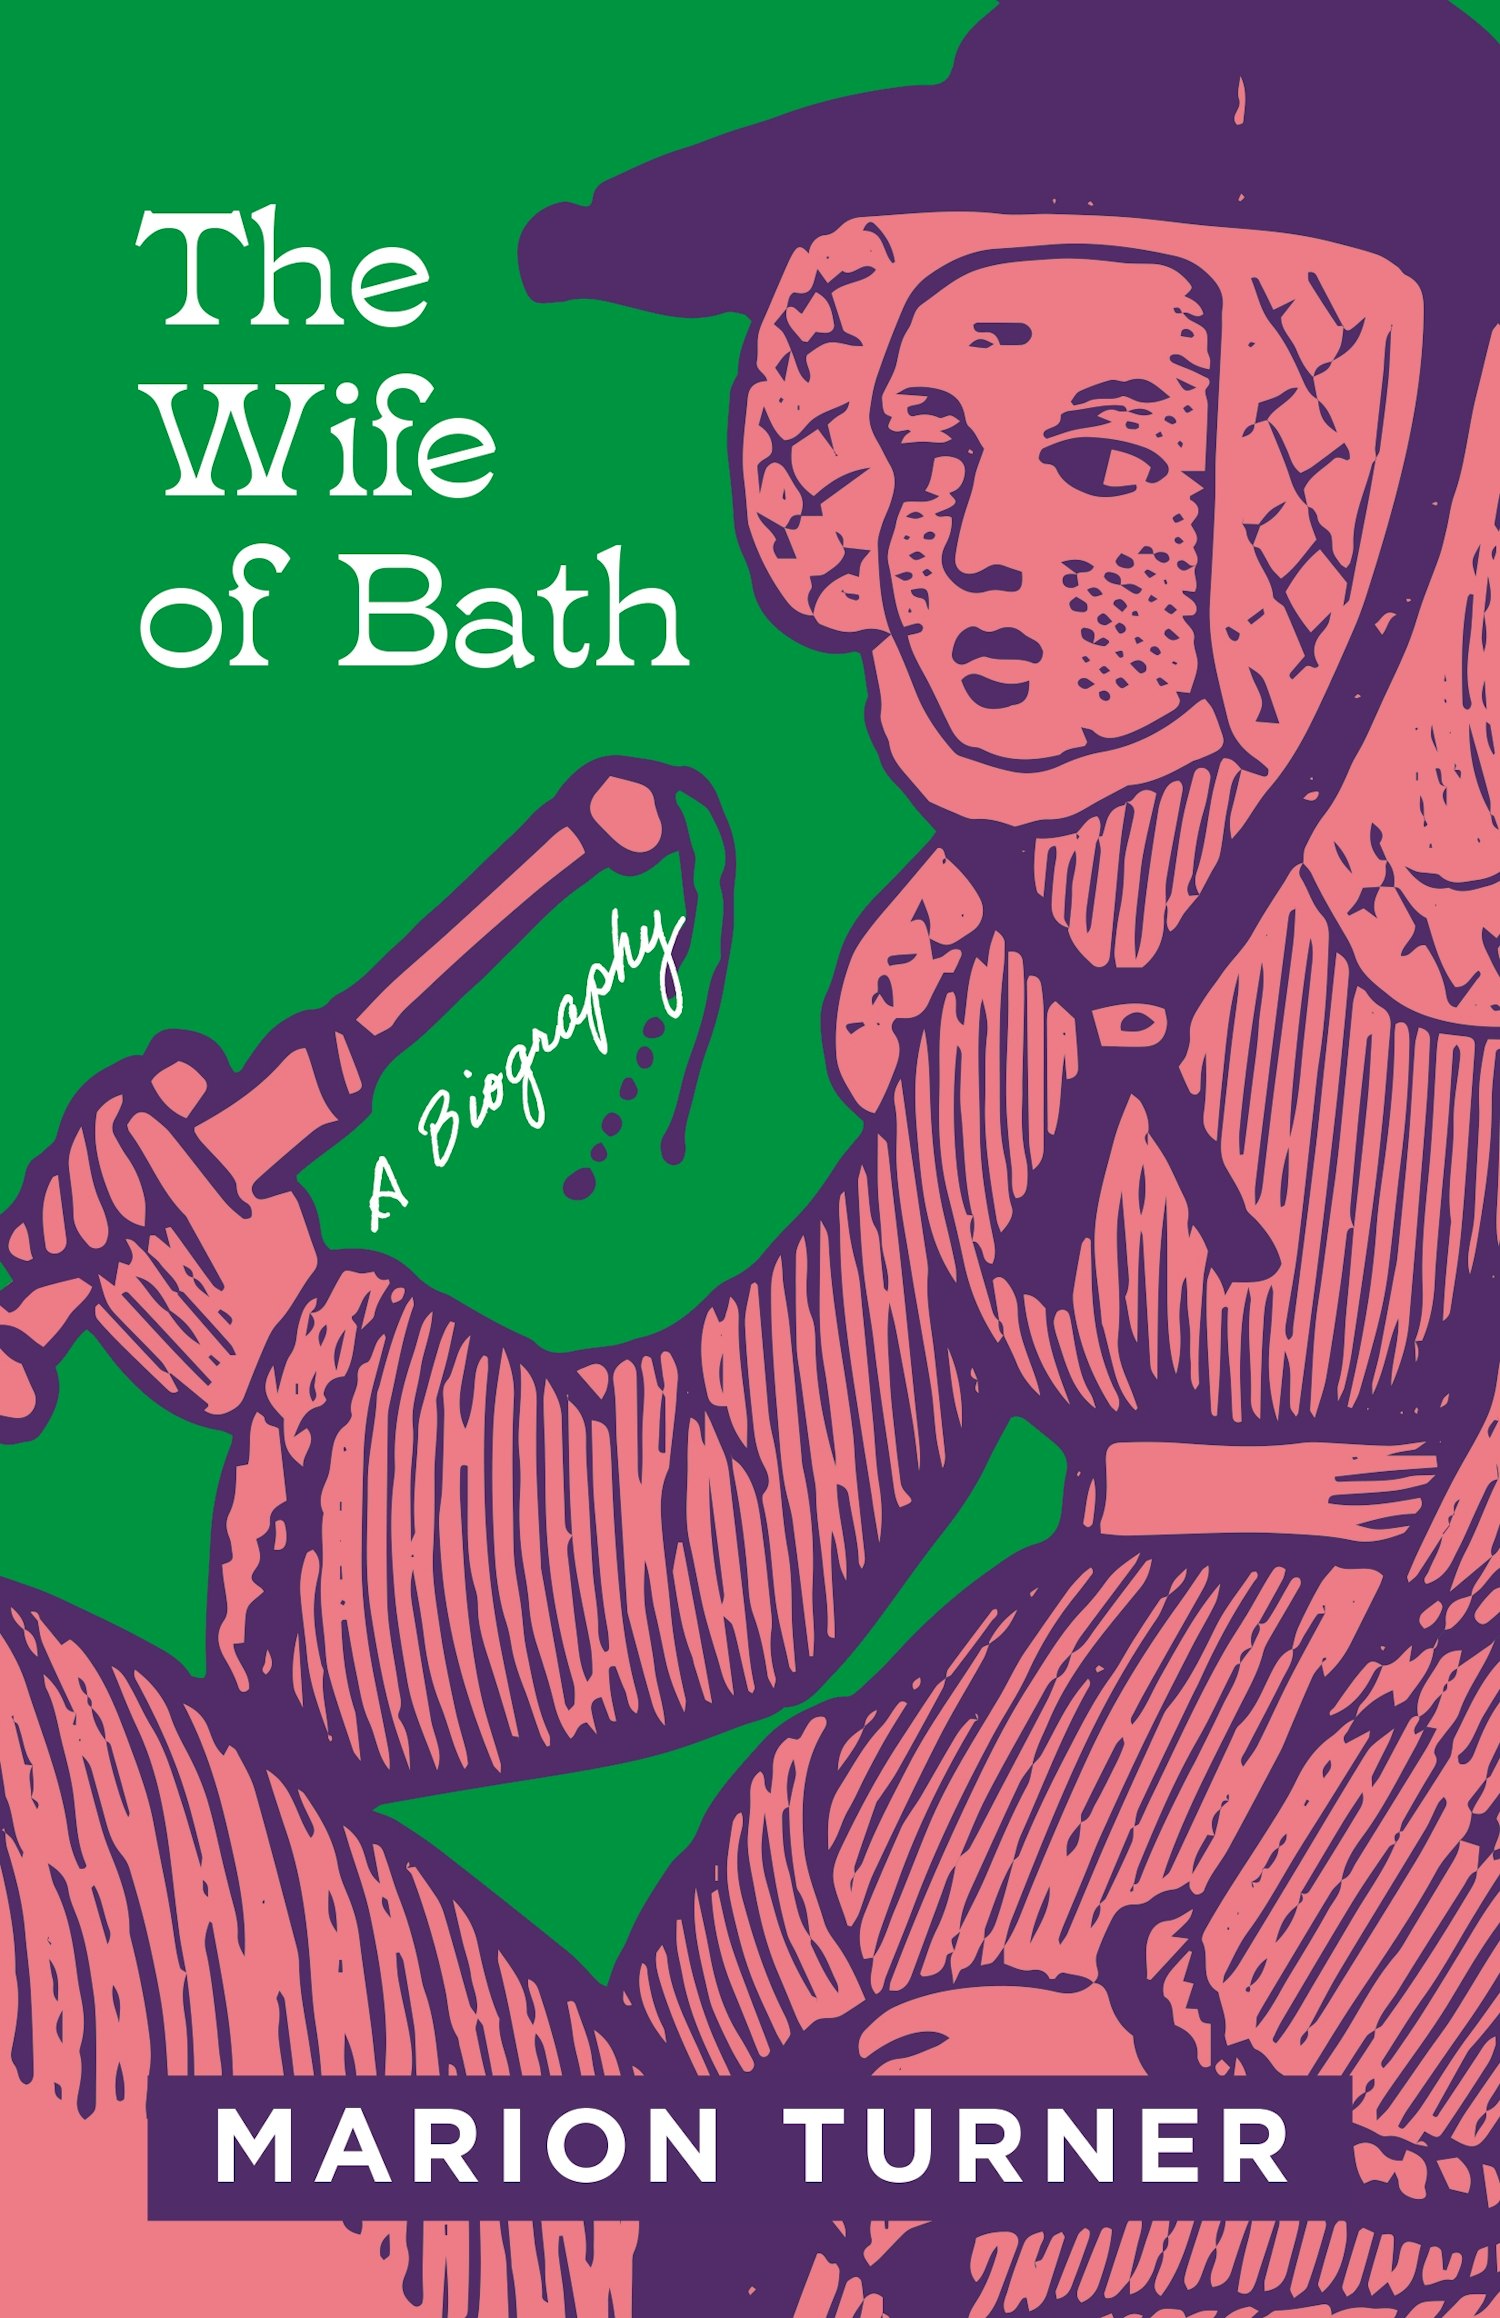 The Wife of Bathy